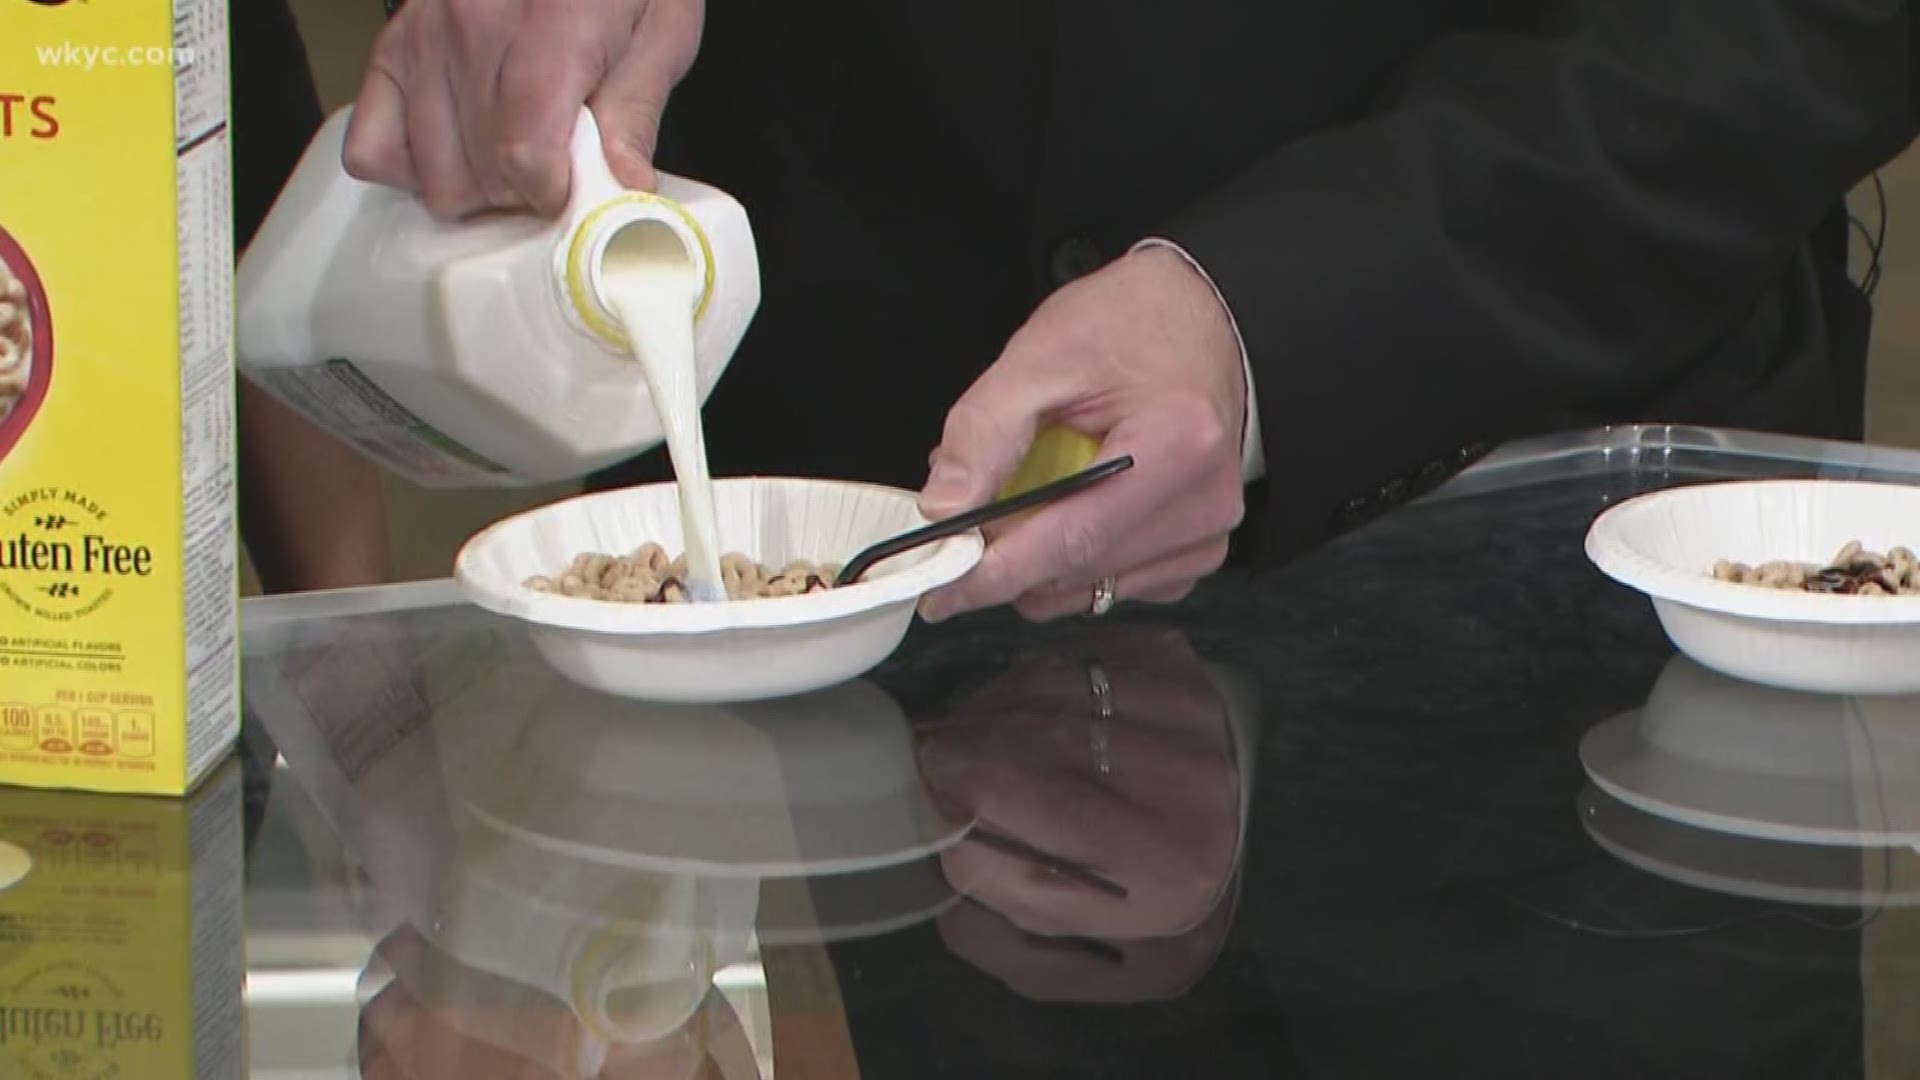 Oct. 23, 2018: Dave Chudowsky shares his biggest breakfast secret on how Hershey's syrup makes cereal better.